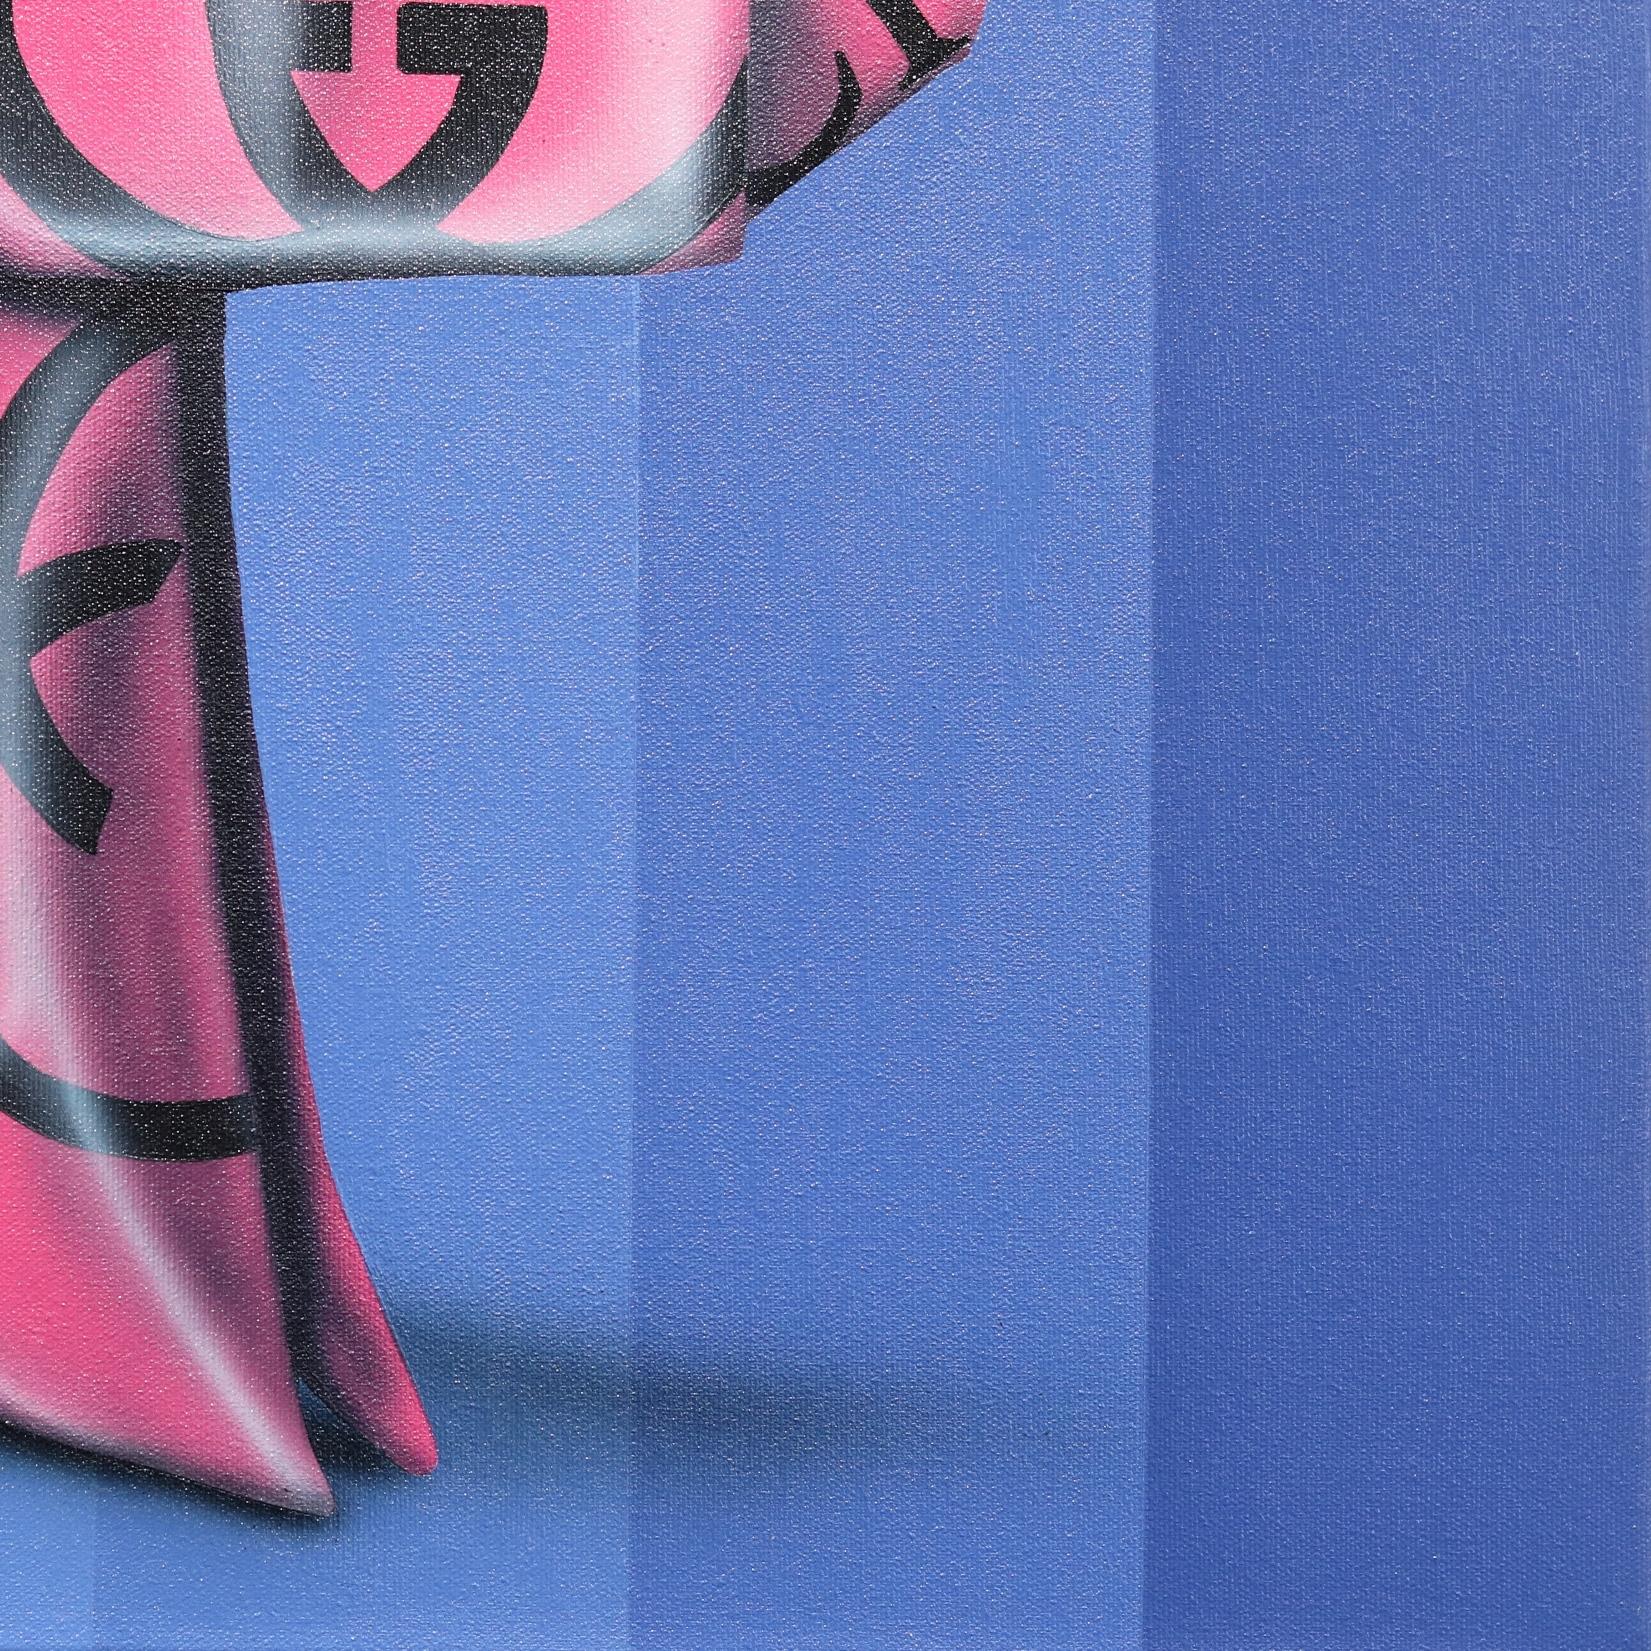 Emilio Rama's captivating pop art-inspired paintings featuring origami animal figures are a distinctive and original contribution to the realm of contemporary art. With a vibrant interplay of bold colors, logos, and allusions to popular culture,